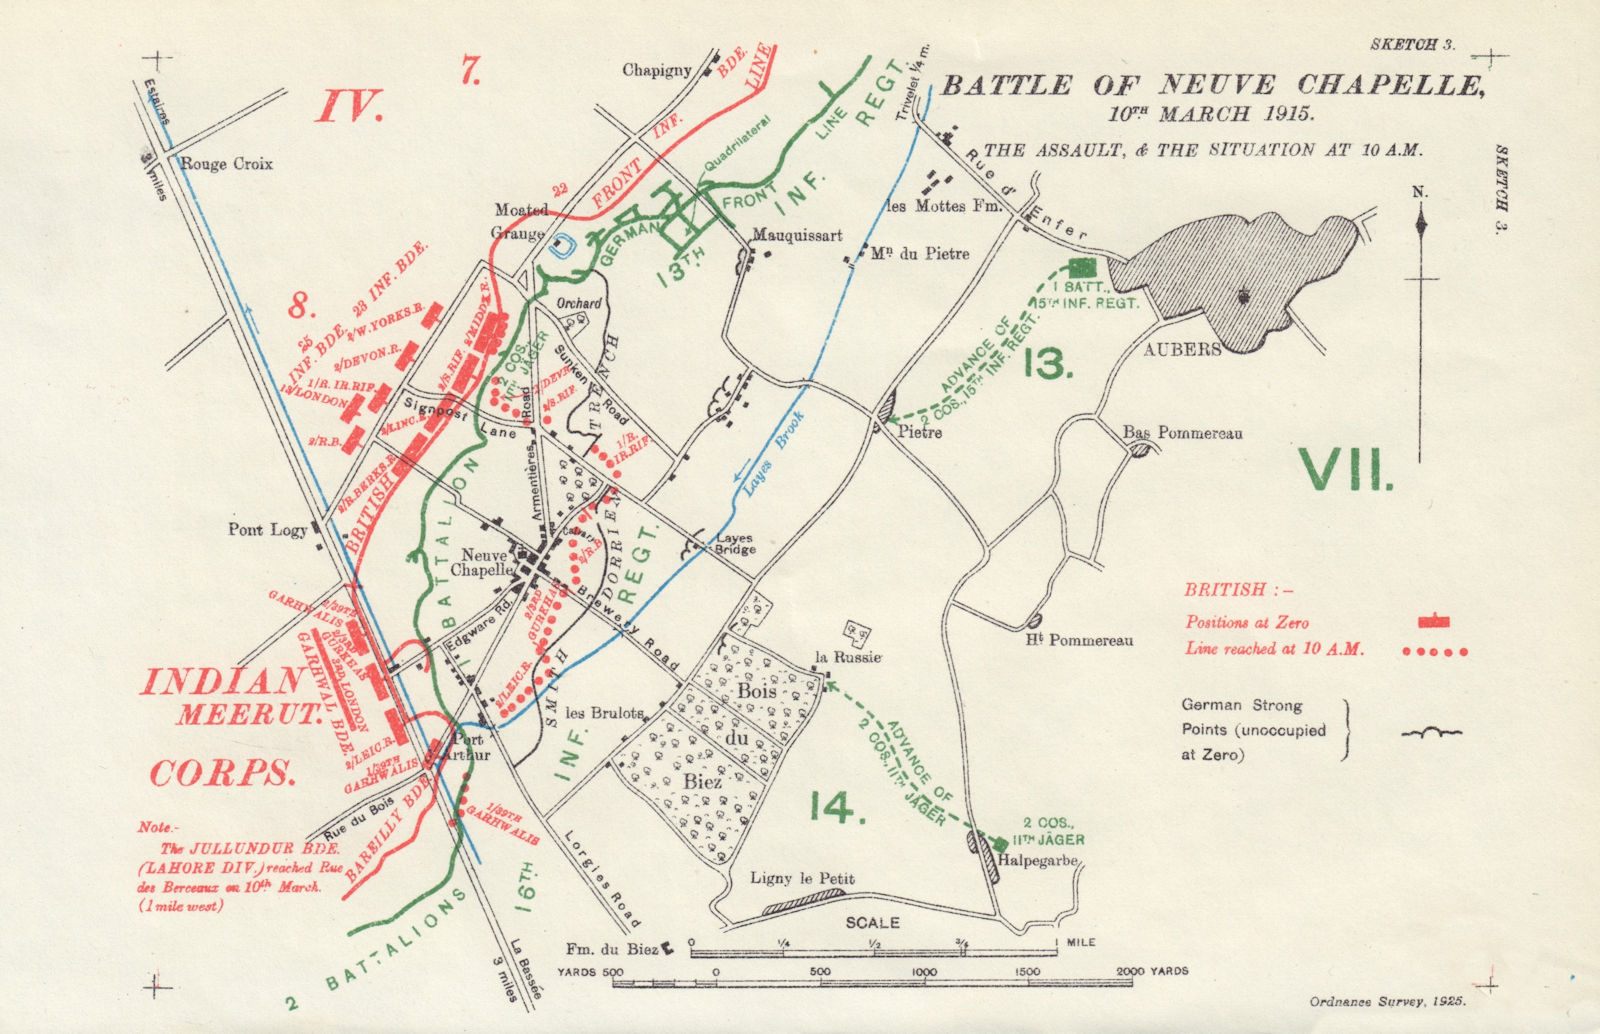 Battle of Neuve Chapelle 10th March 1915. Assault & 10am. Trenches 1927 map